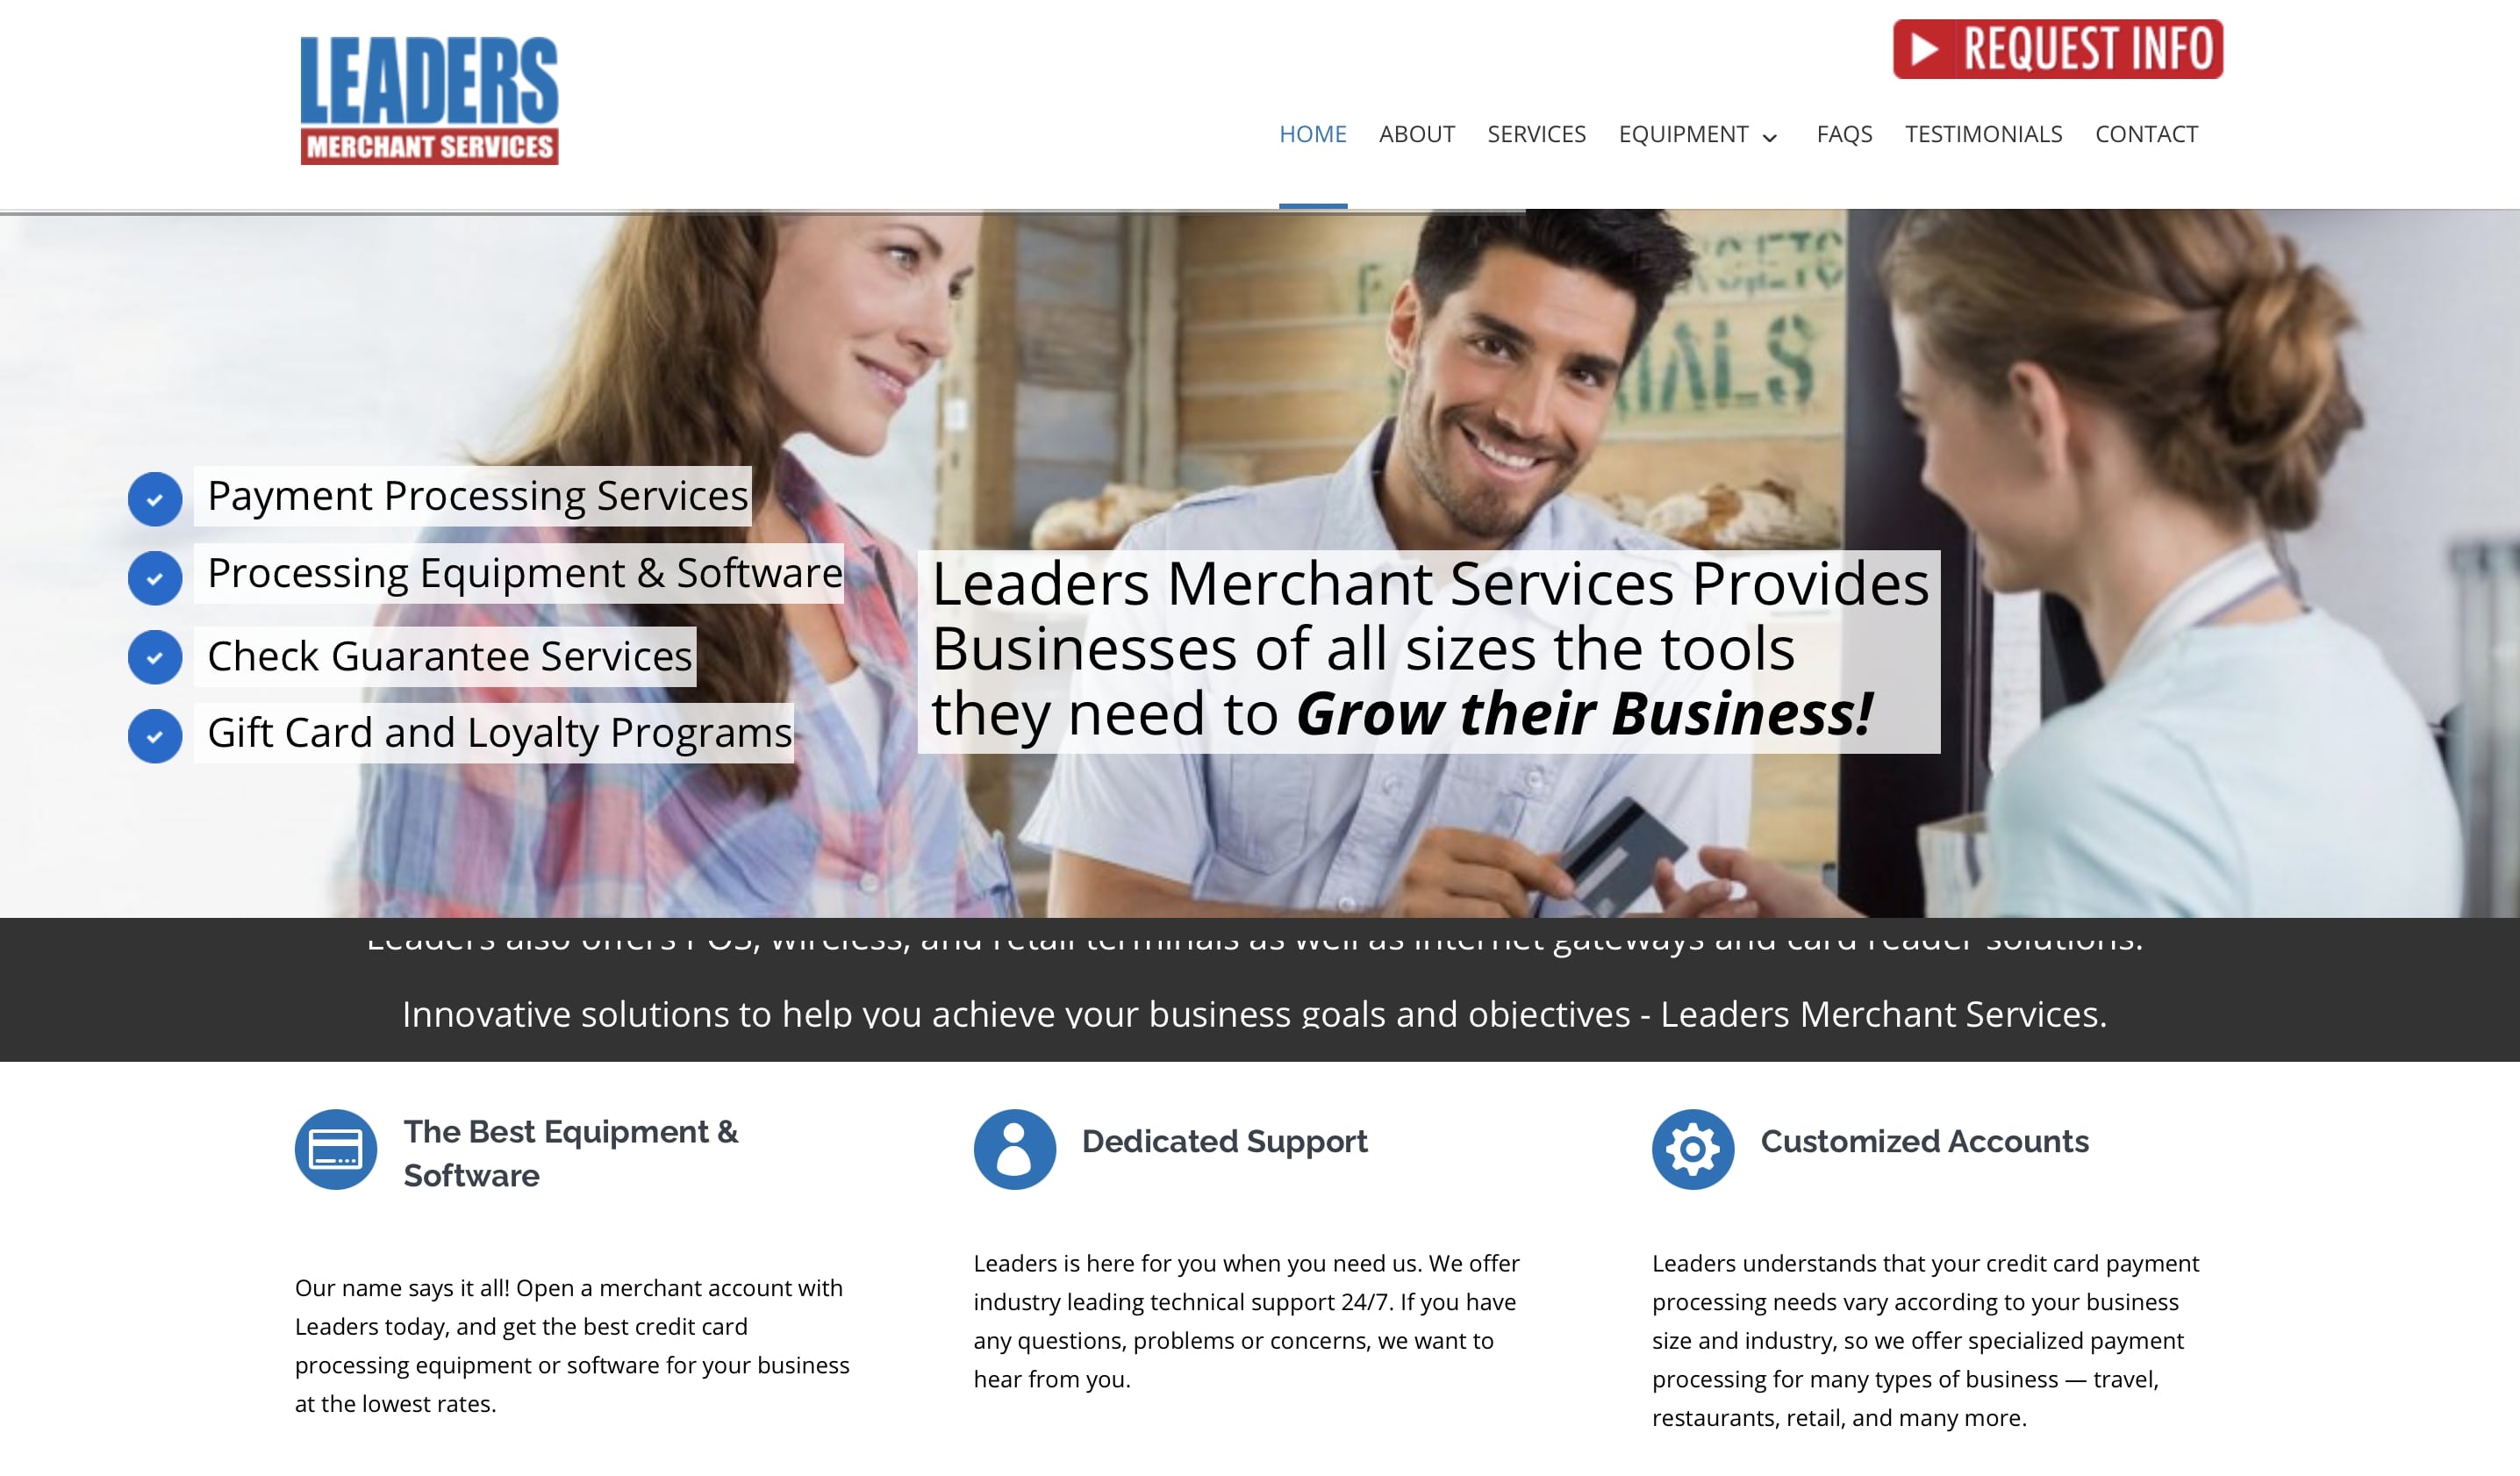 What is Leaders Merchant Services?